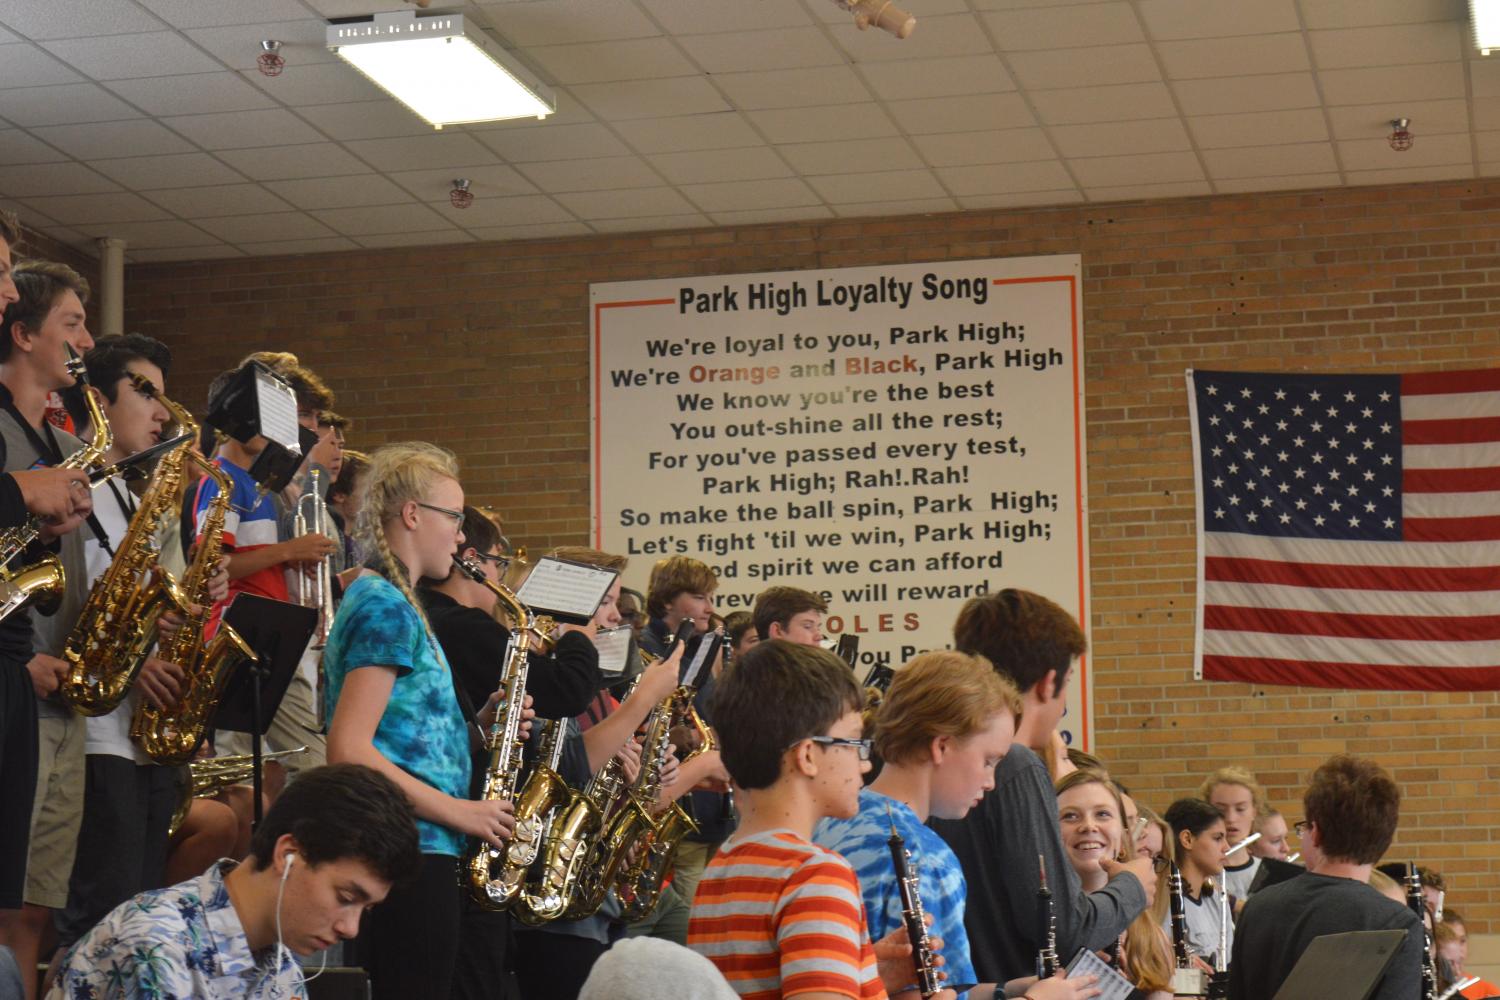 The Park band plays the Park High Loyalty Song at the homecoming pepfest on September 15. Park has been trying to revive school pride in students throughout the 17-18 school year.